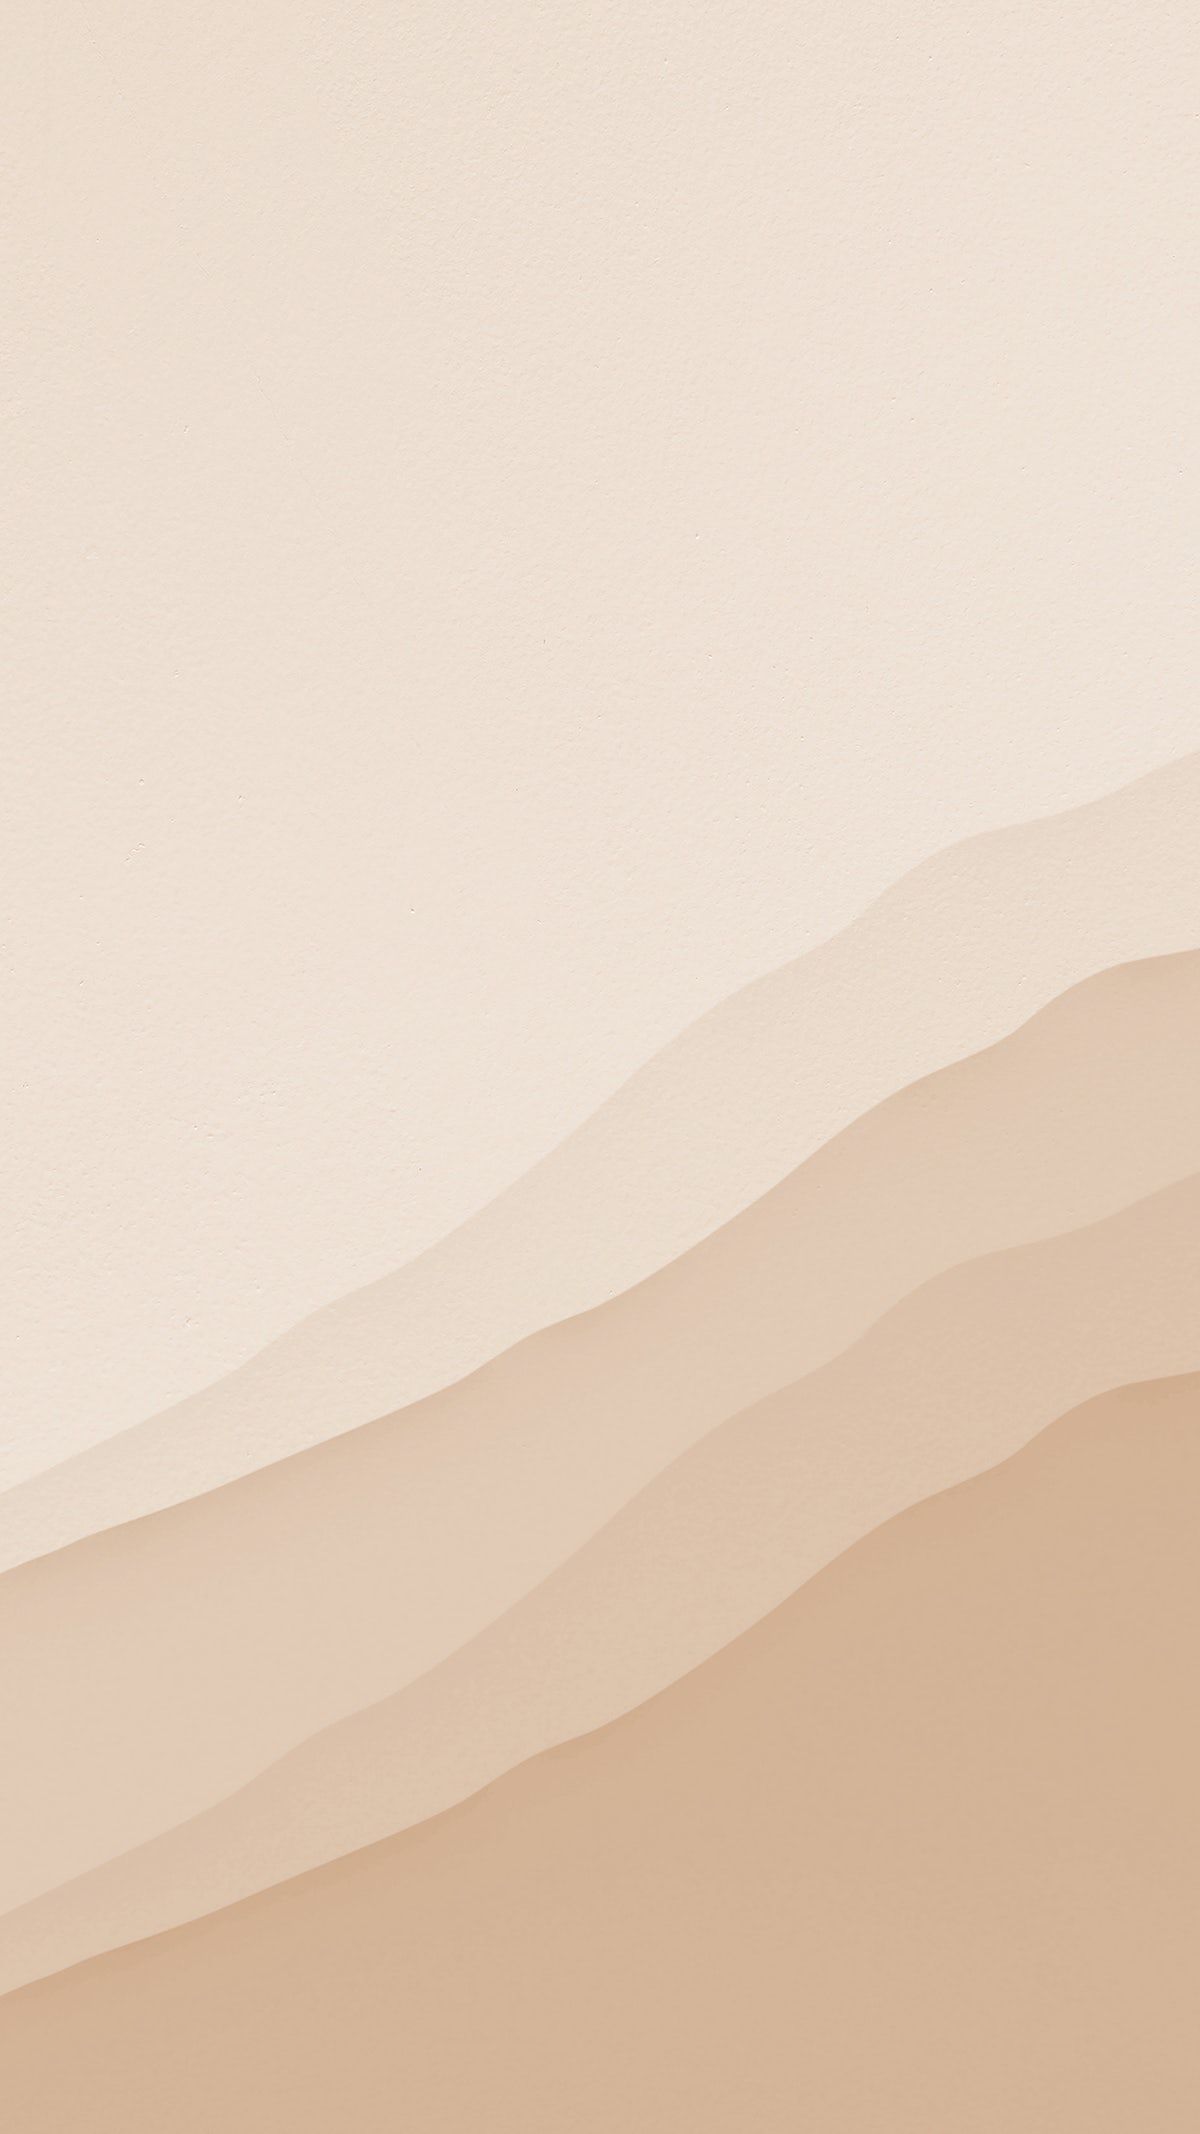 Download premium image of Abstract beige wallpaper background image  by Nunny about mobile wallpaper wallpaper mobile wallpaper aesthetic beige background and watercolor backgrounds 2620433